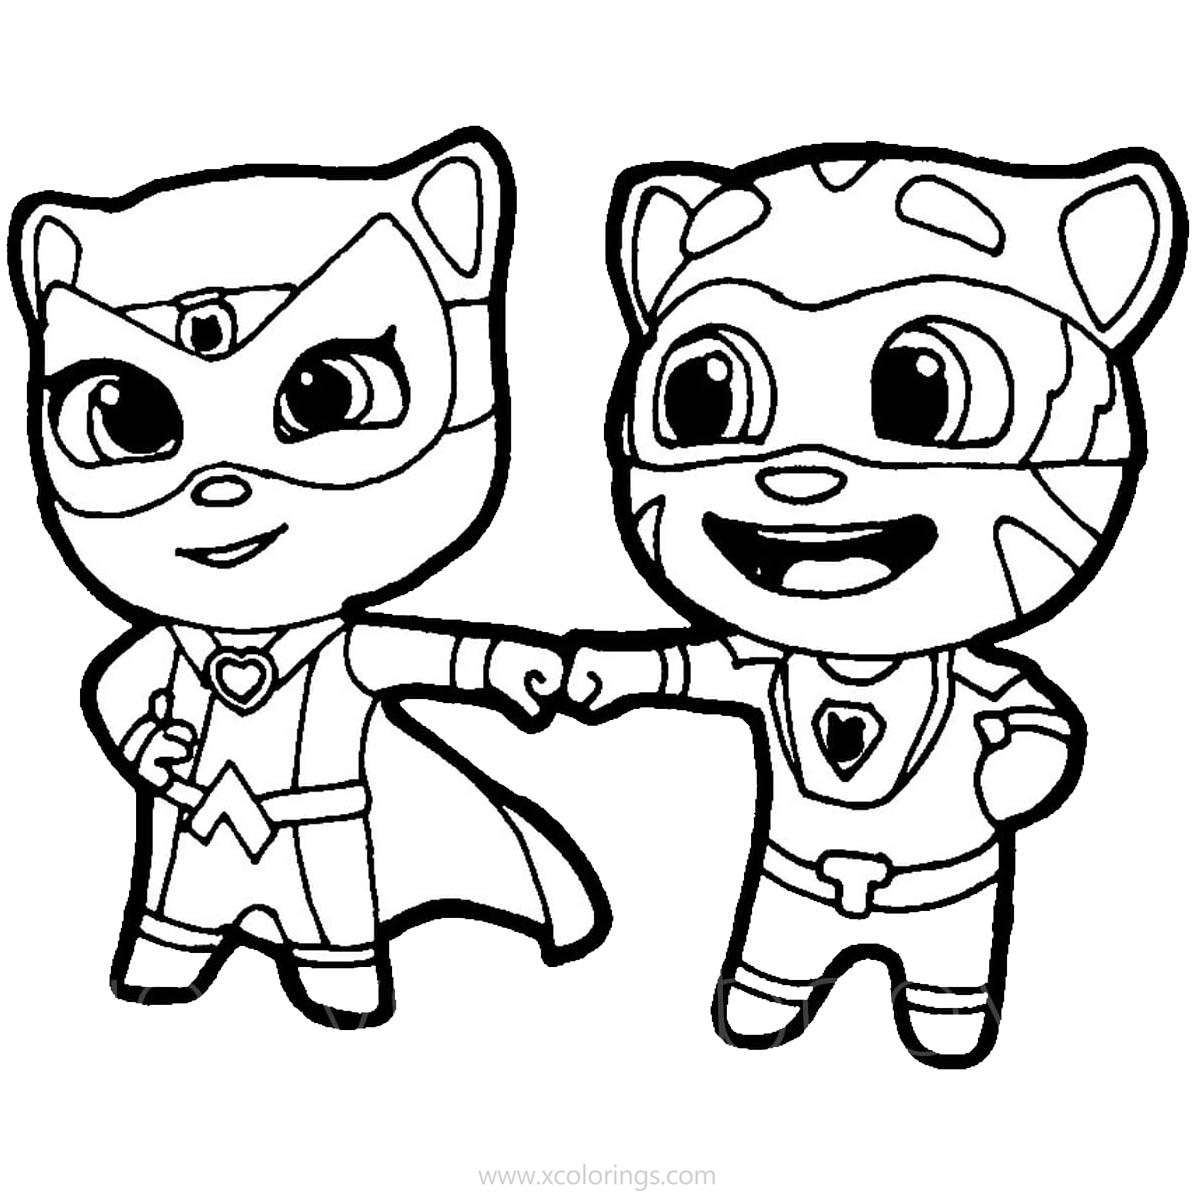 Free Talking Tom Heroes Coloring Pages Tom and Angela printable